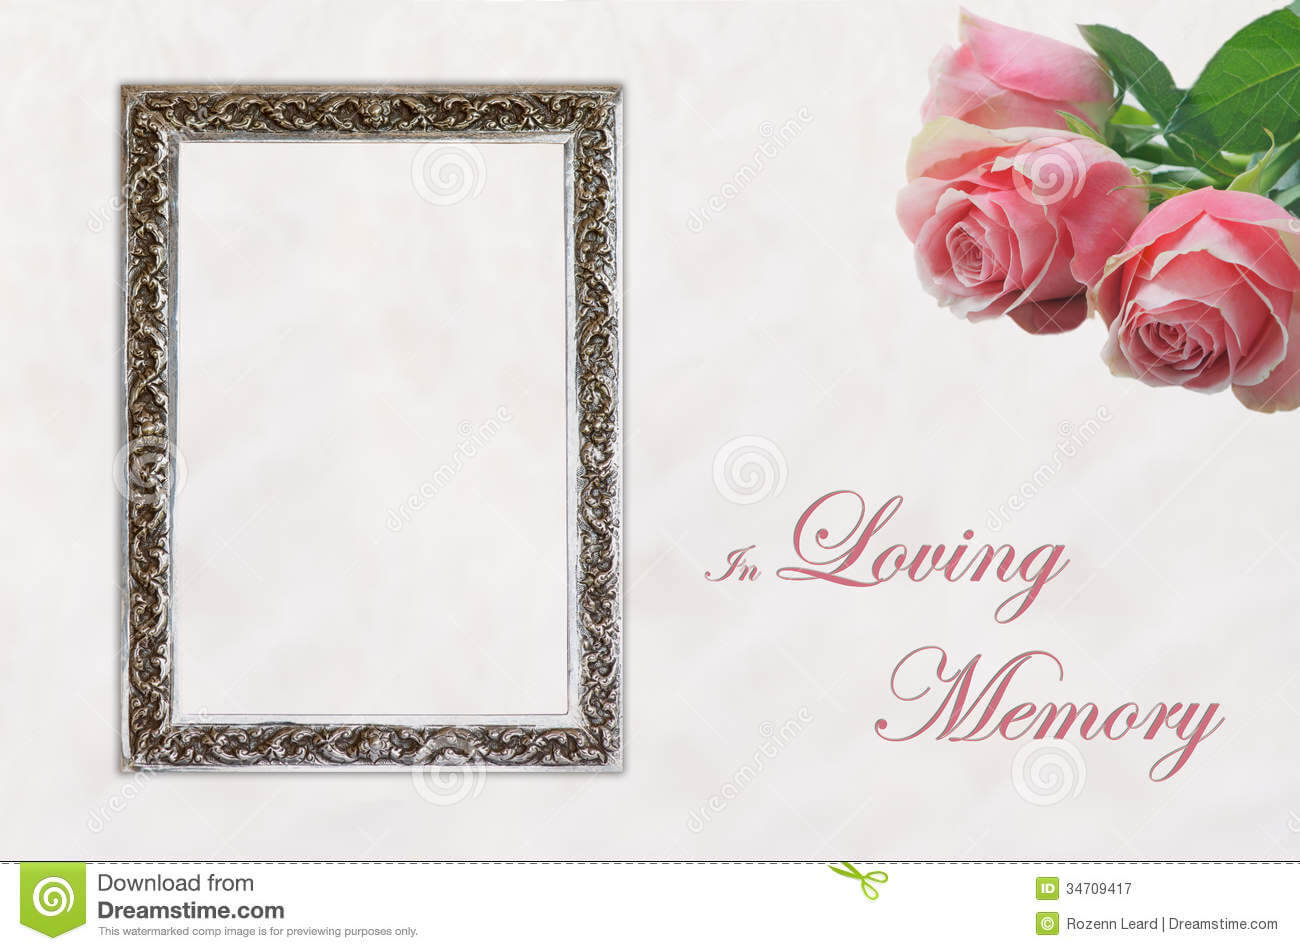 In Memory Cards Templates ] – Memory Template 4 Celebration With Memorial Cards For Funeral Template Free